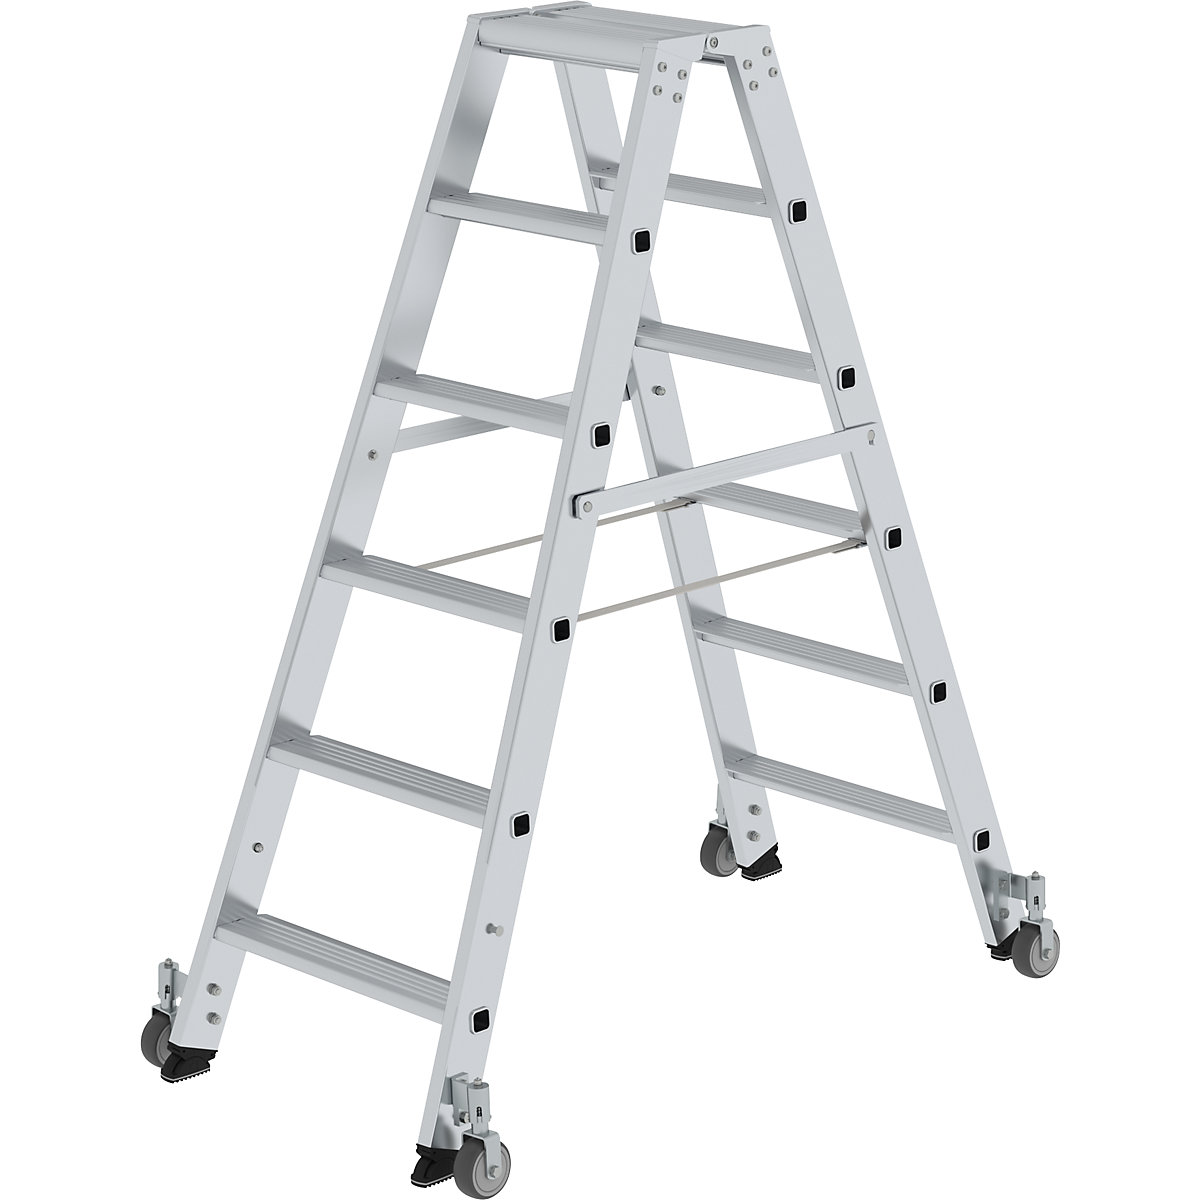 Step ladder, double sided – MUNK, mobile model, 2 x 6 steps-10